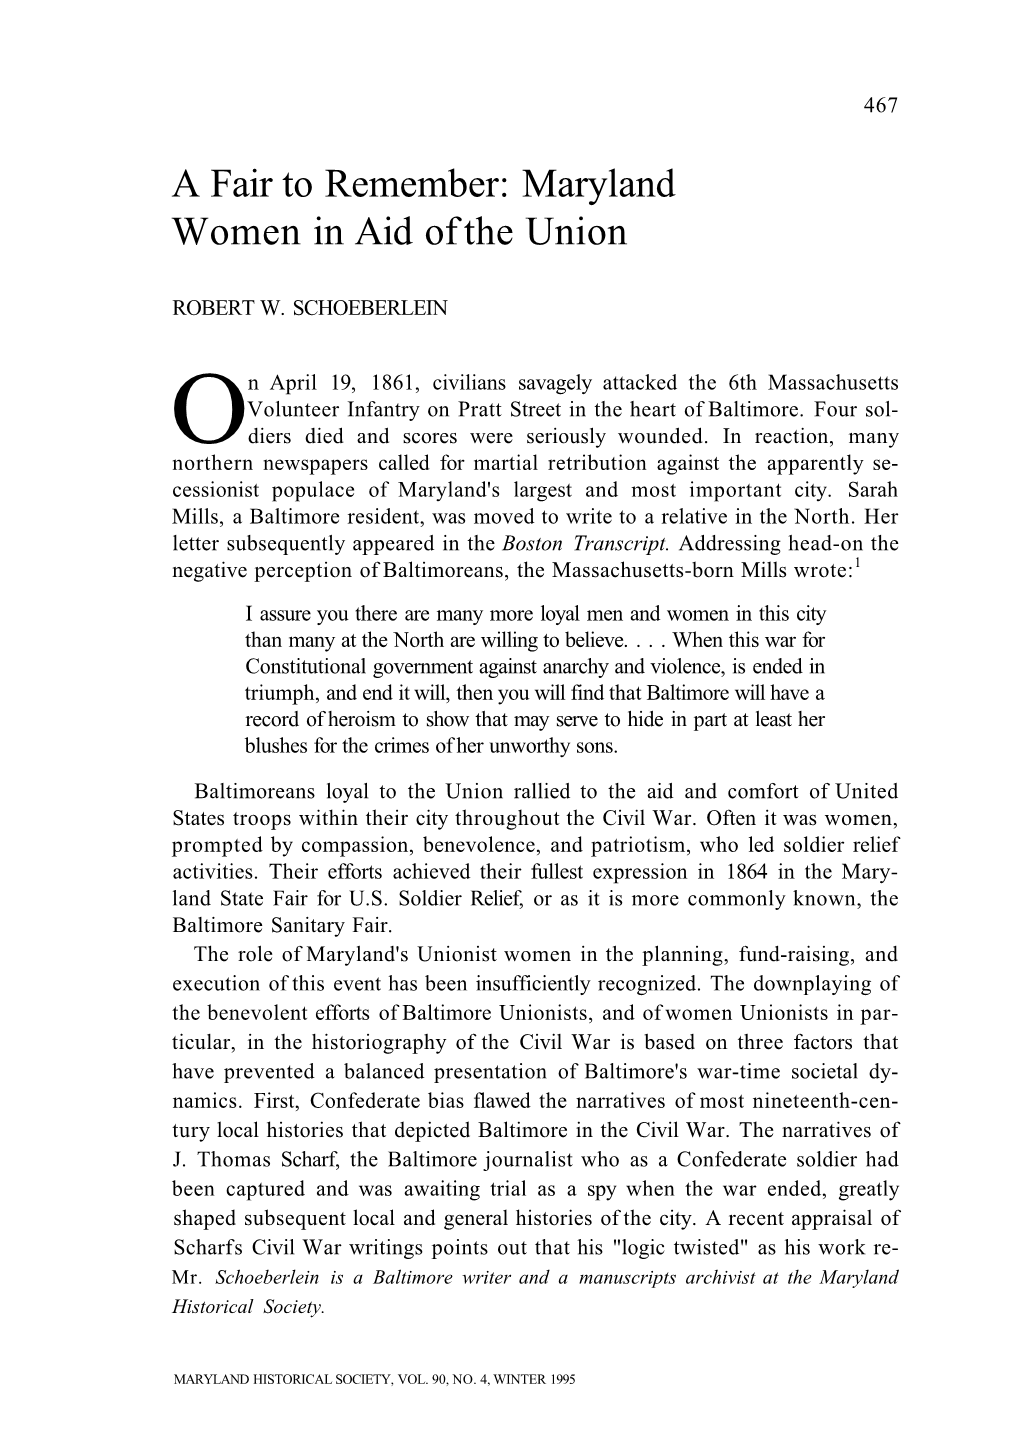 A Fair to Remember: Maryland Women in Aid of the Union